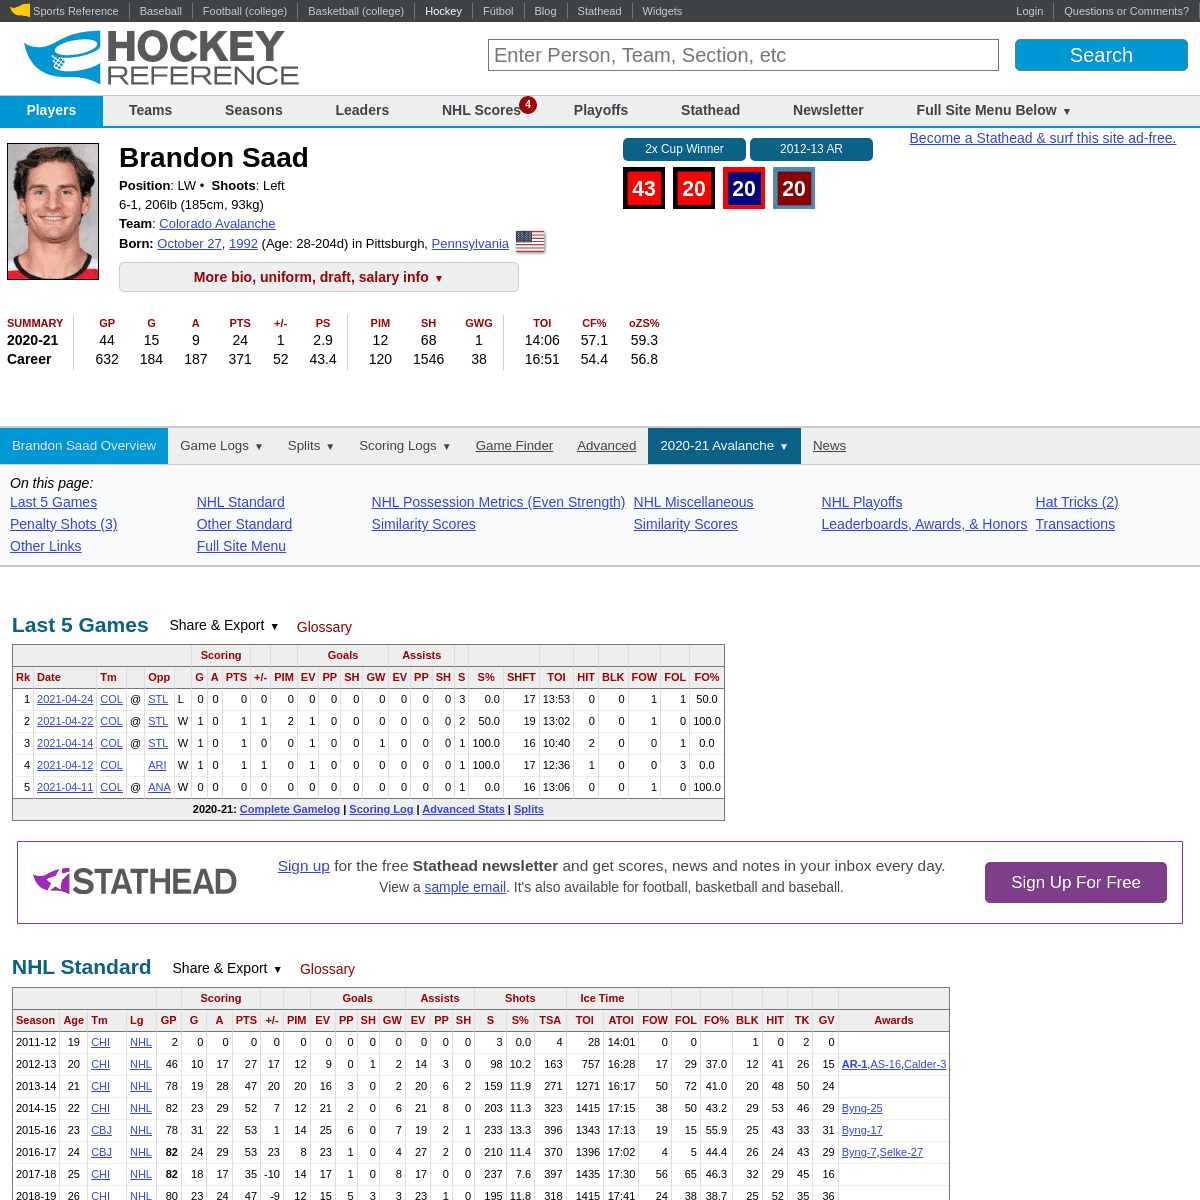 A complete backup of https://www.hockey-reference.com/players/s/saadbr01.html